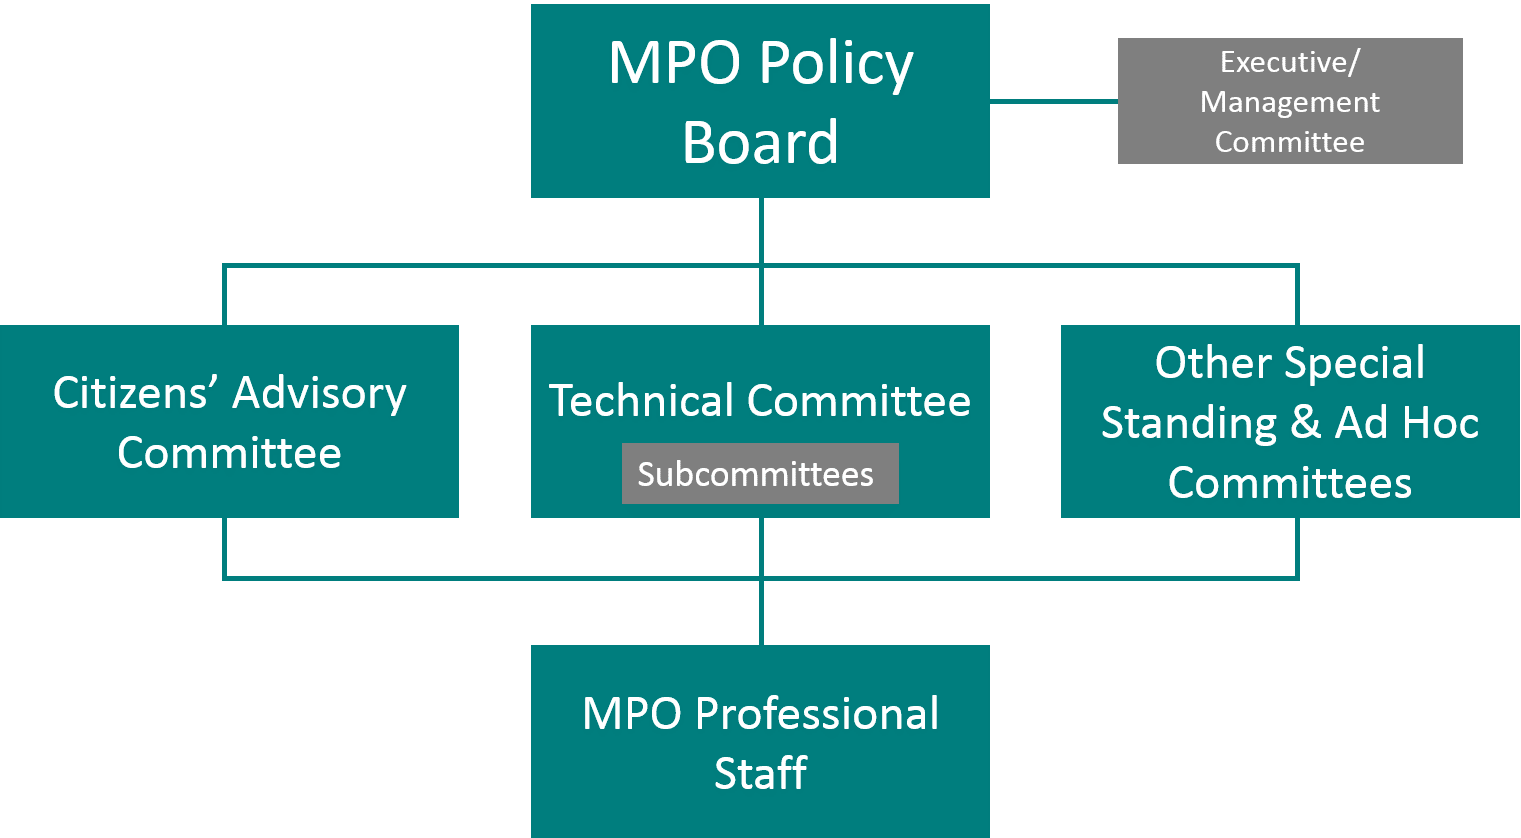 MPO decision making flowchart: the top level is MPO Policy Board, with a lateral relationship with Executive/Management Committee. It oversees three subcommittees: Citizen's Advisory Committee, Technical Committee, Other Special Standing and Ad Hoc Committees. These subcommittees oversee the MPO Professional Staff.